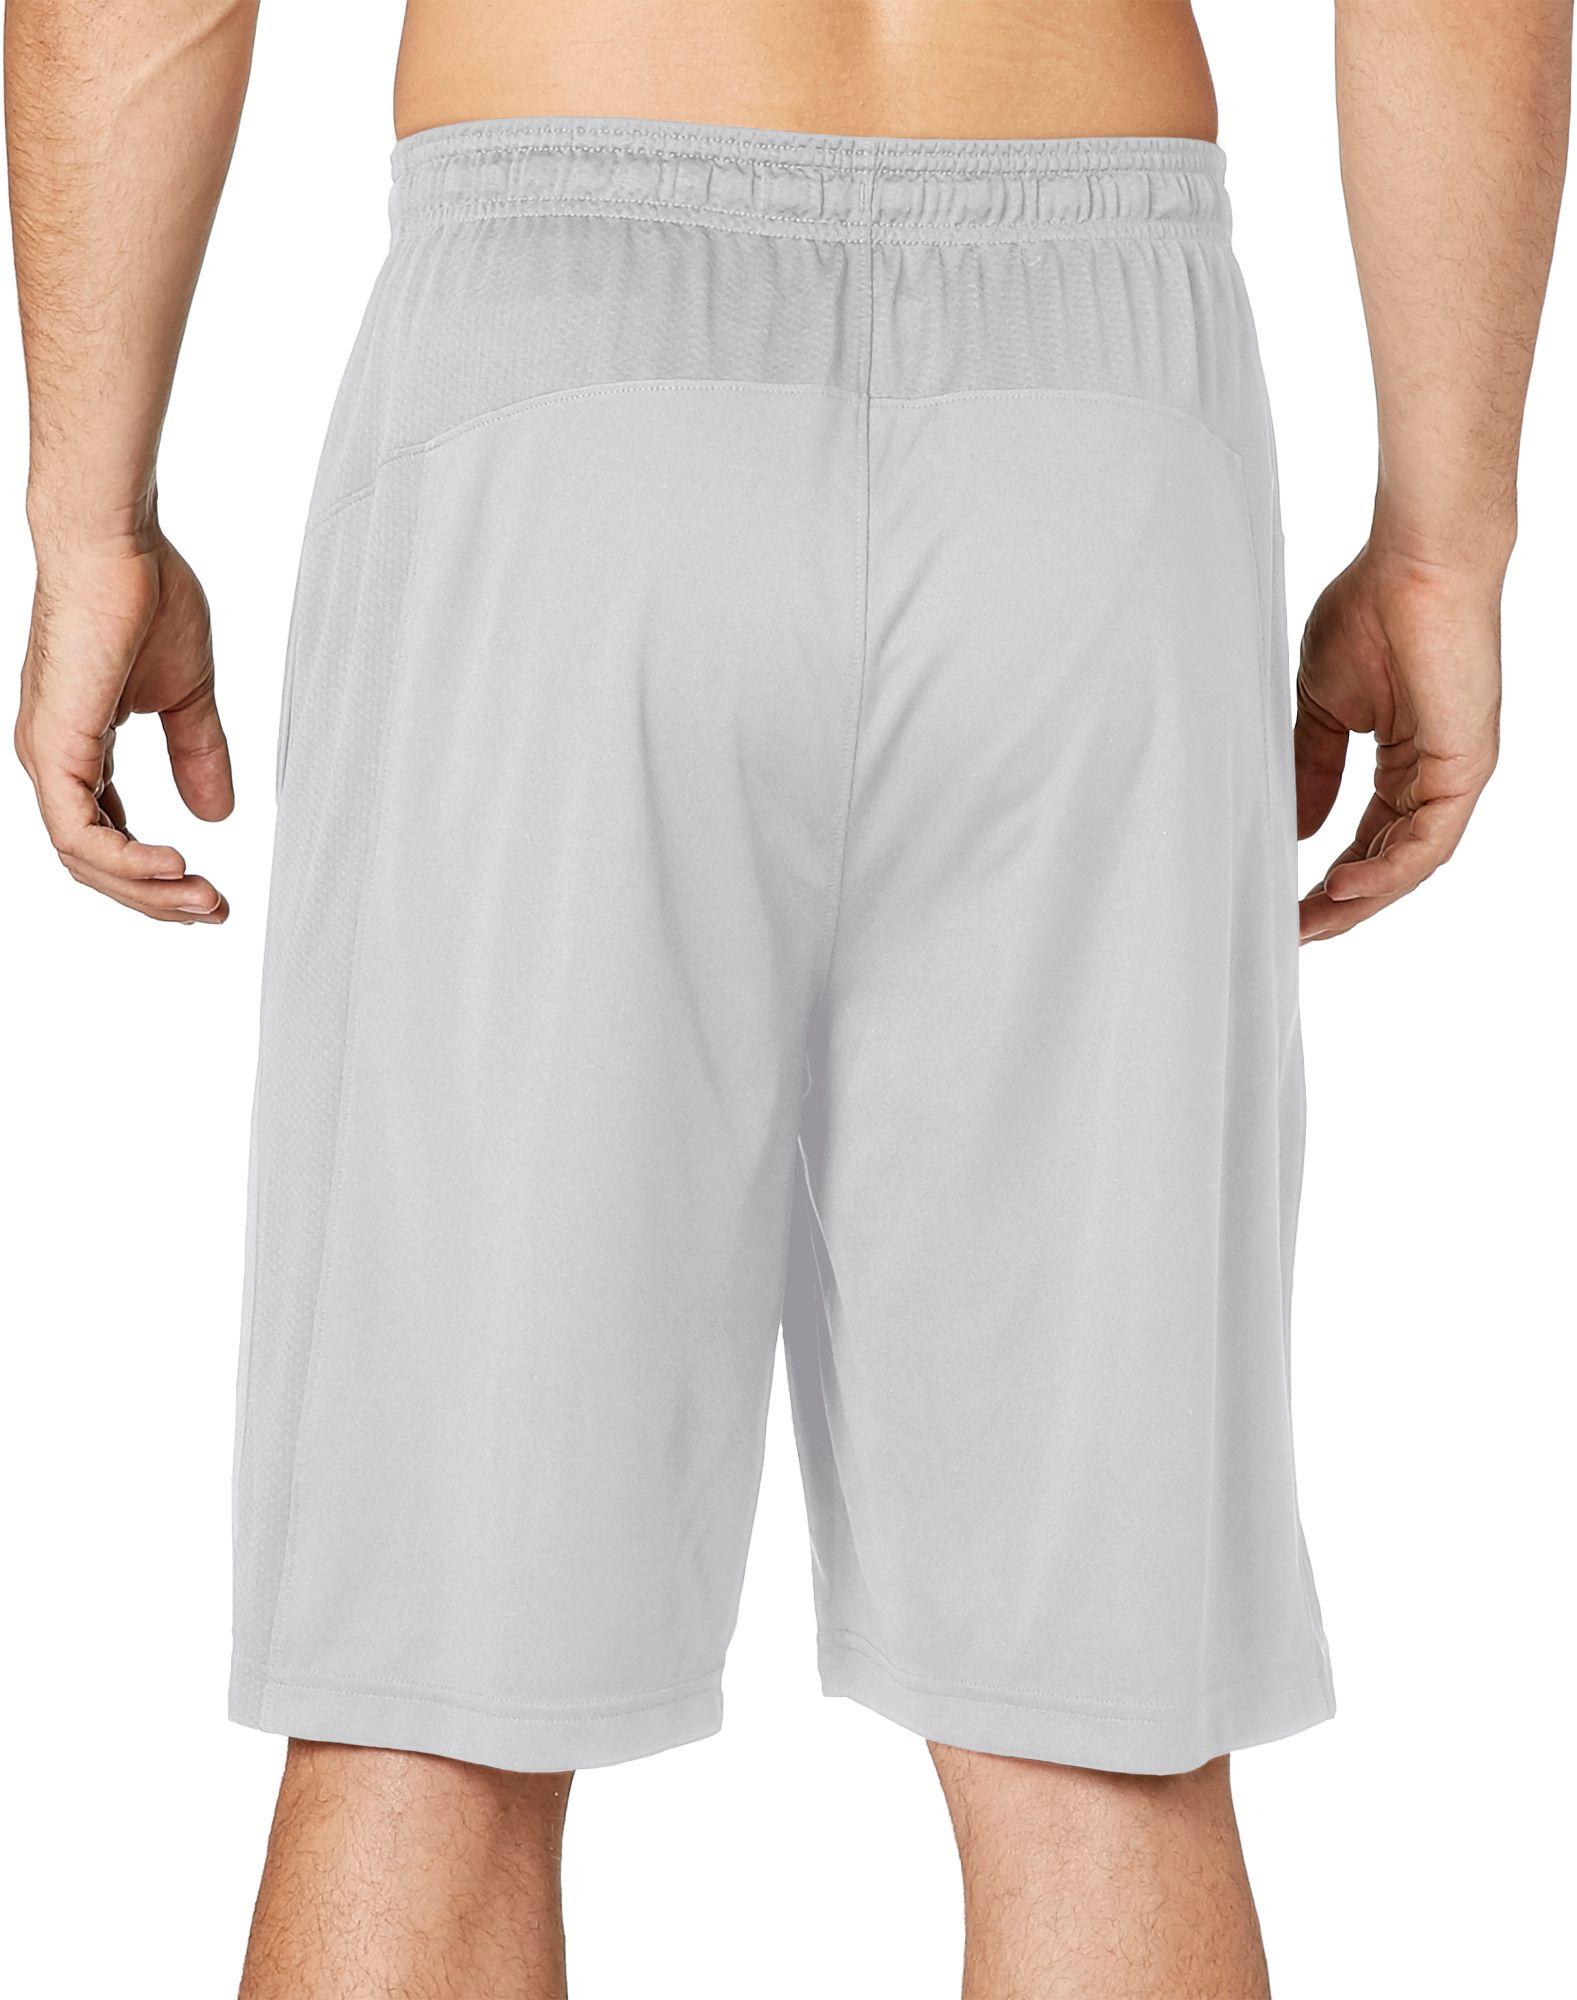 Reebok Solid Performance Shorts in Gray for Men - Lyst